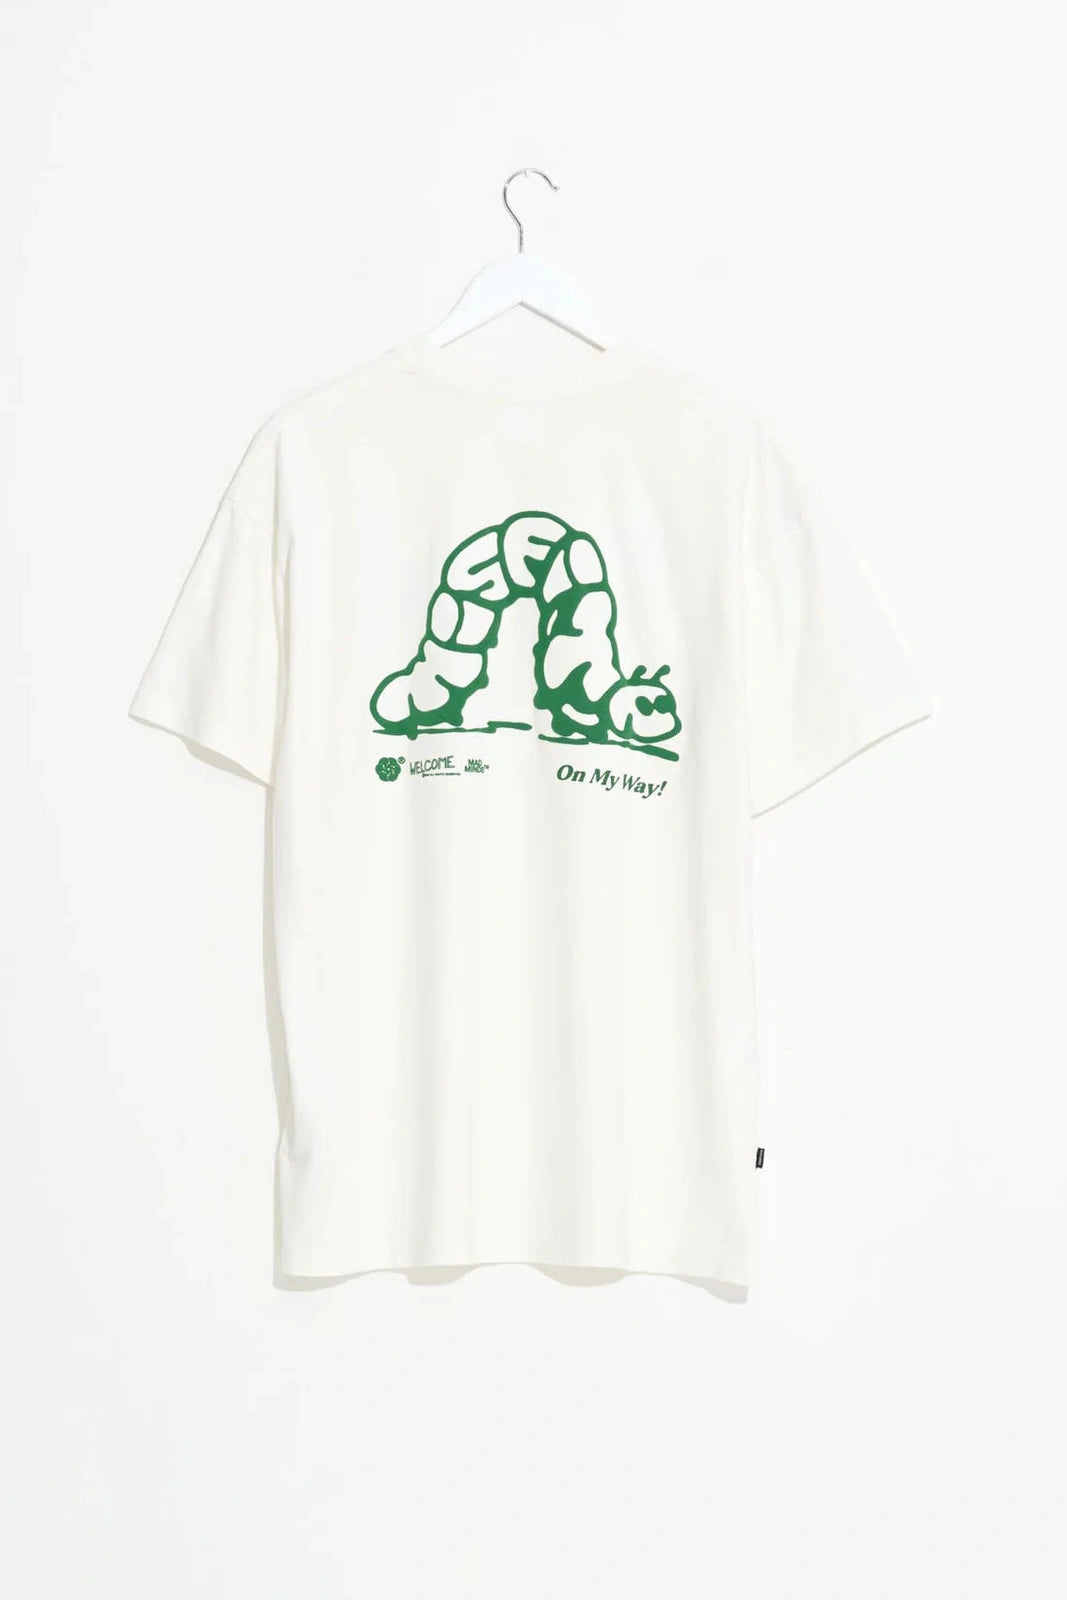 MISFIT Third Cycle ss Tee - pigthrwht